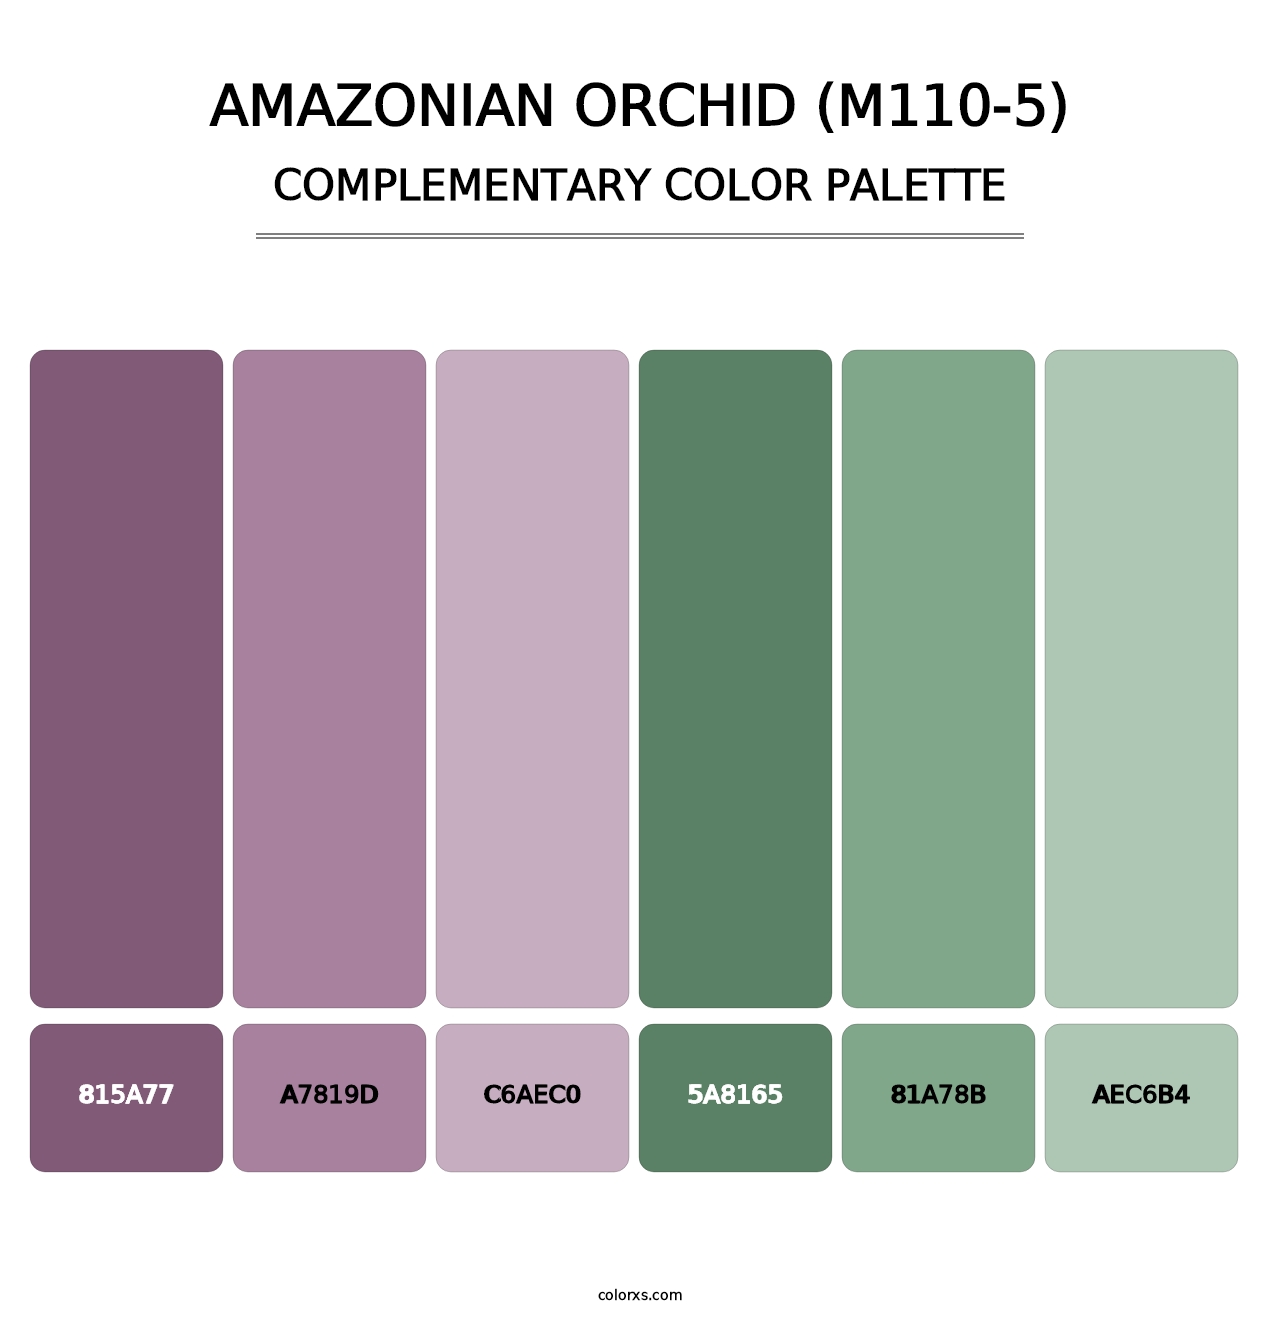 Amazonian Orchid (M110-5) - Complementary Color Palette